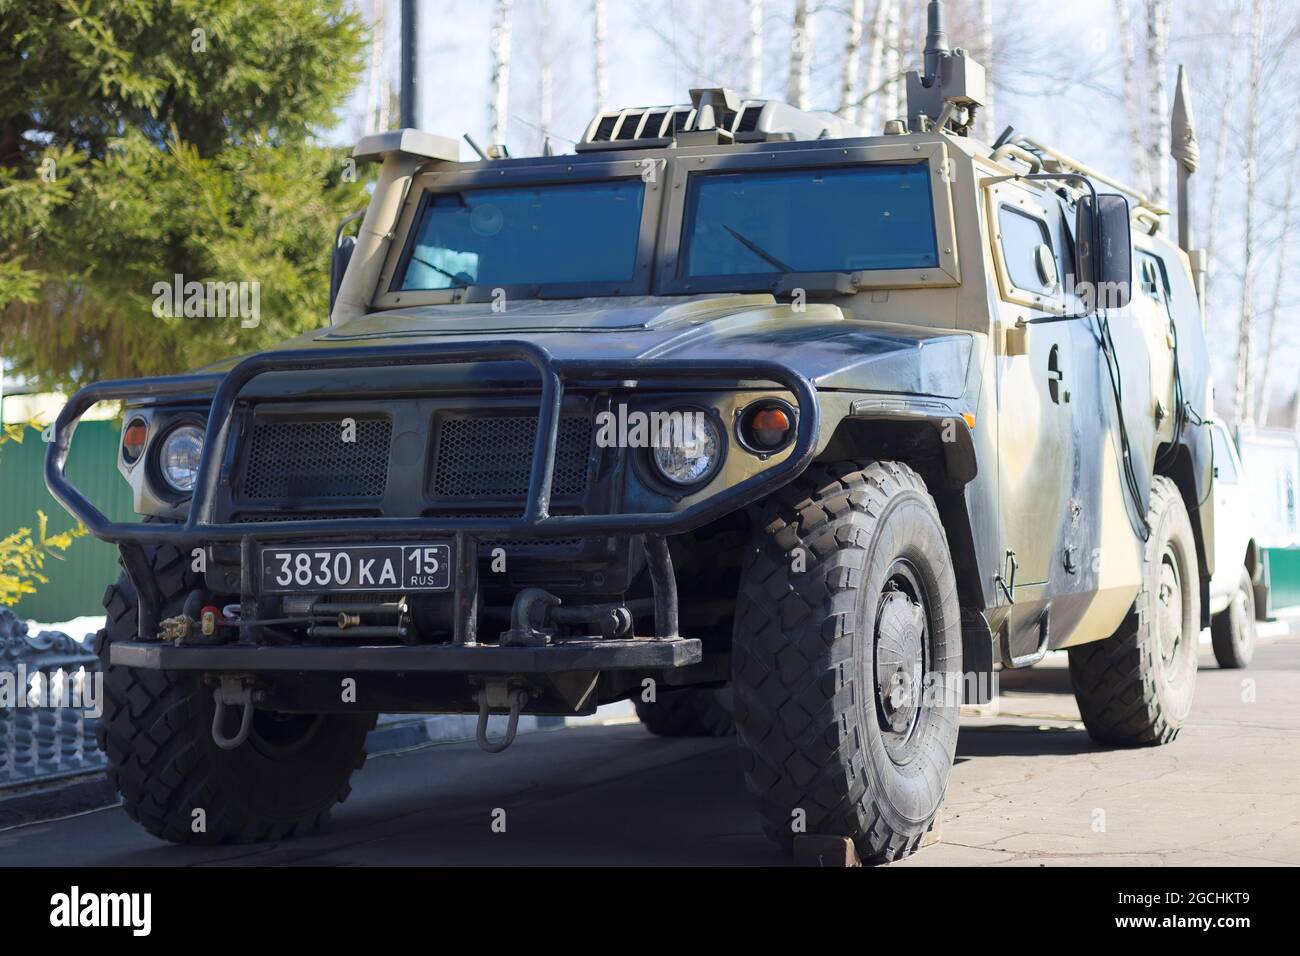 GAZ-2330 Tigr Light armoured vehicle seen during the military exercise. In Elektrostal, a practical lesson was held with servicemen and employees of special forces of the Central District of the Russian Guard. Stock Photo